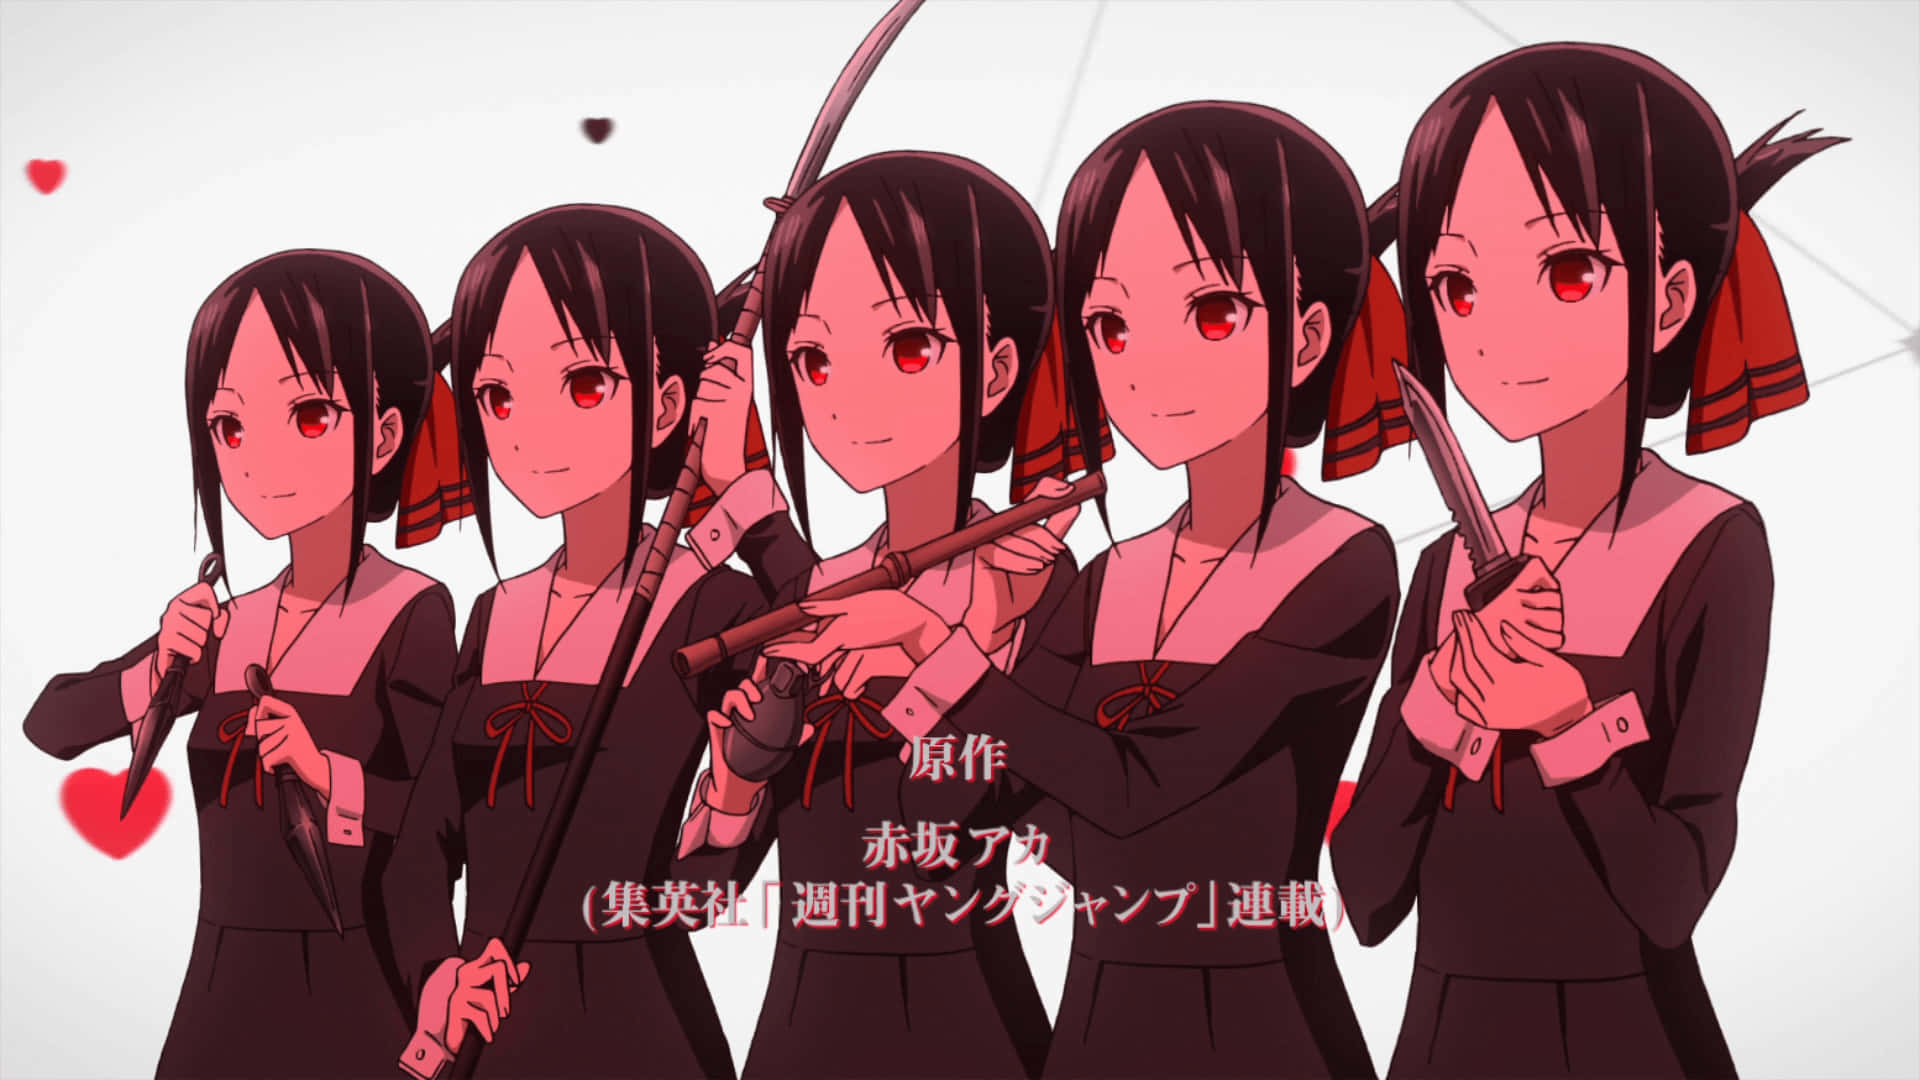 A Group Of Girls Holding Swords In Front Of Hearts Wallpaper